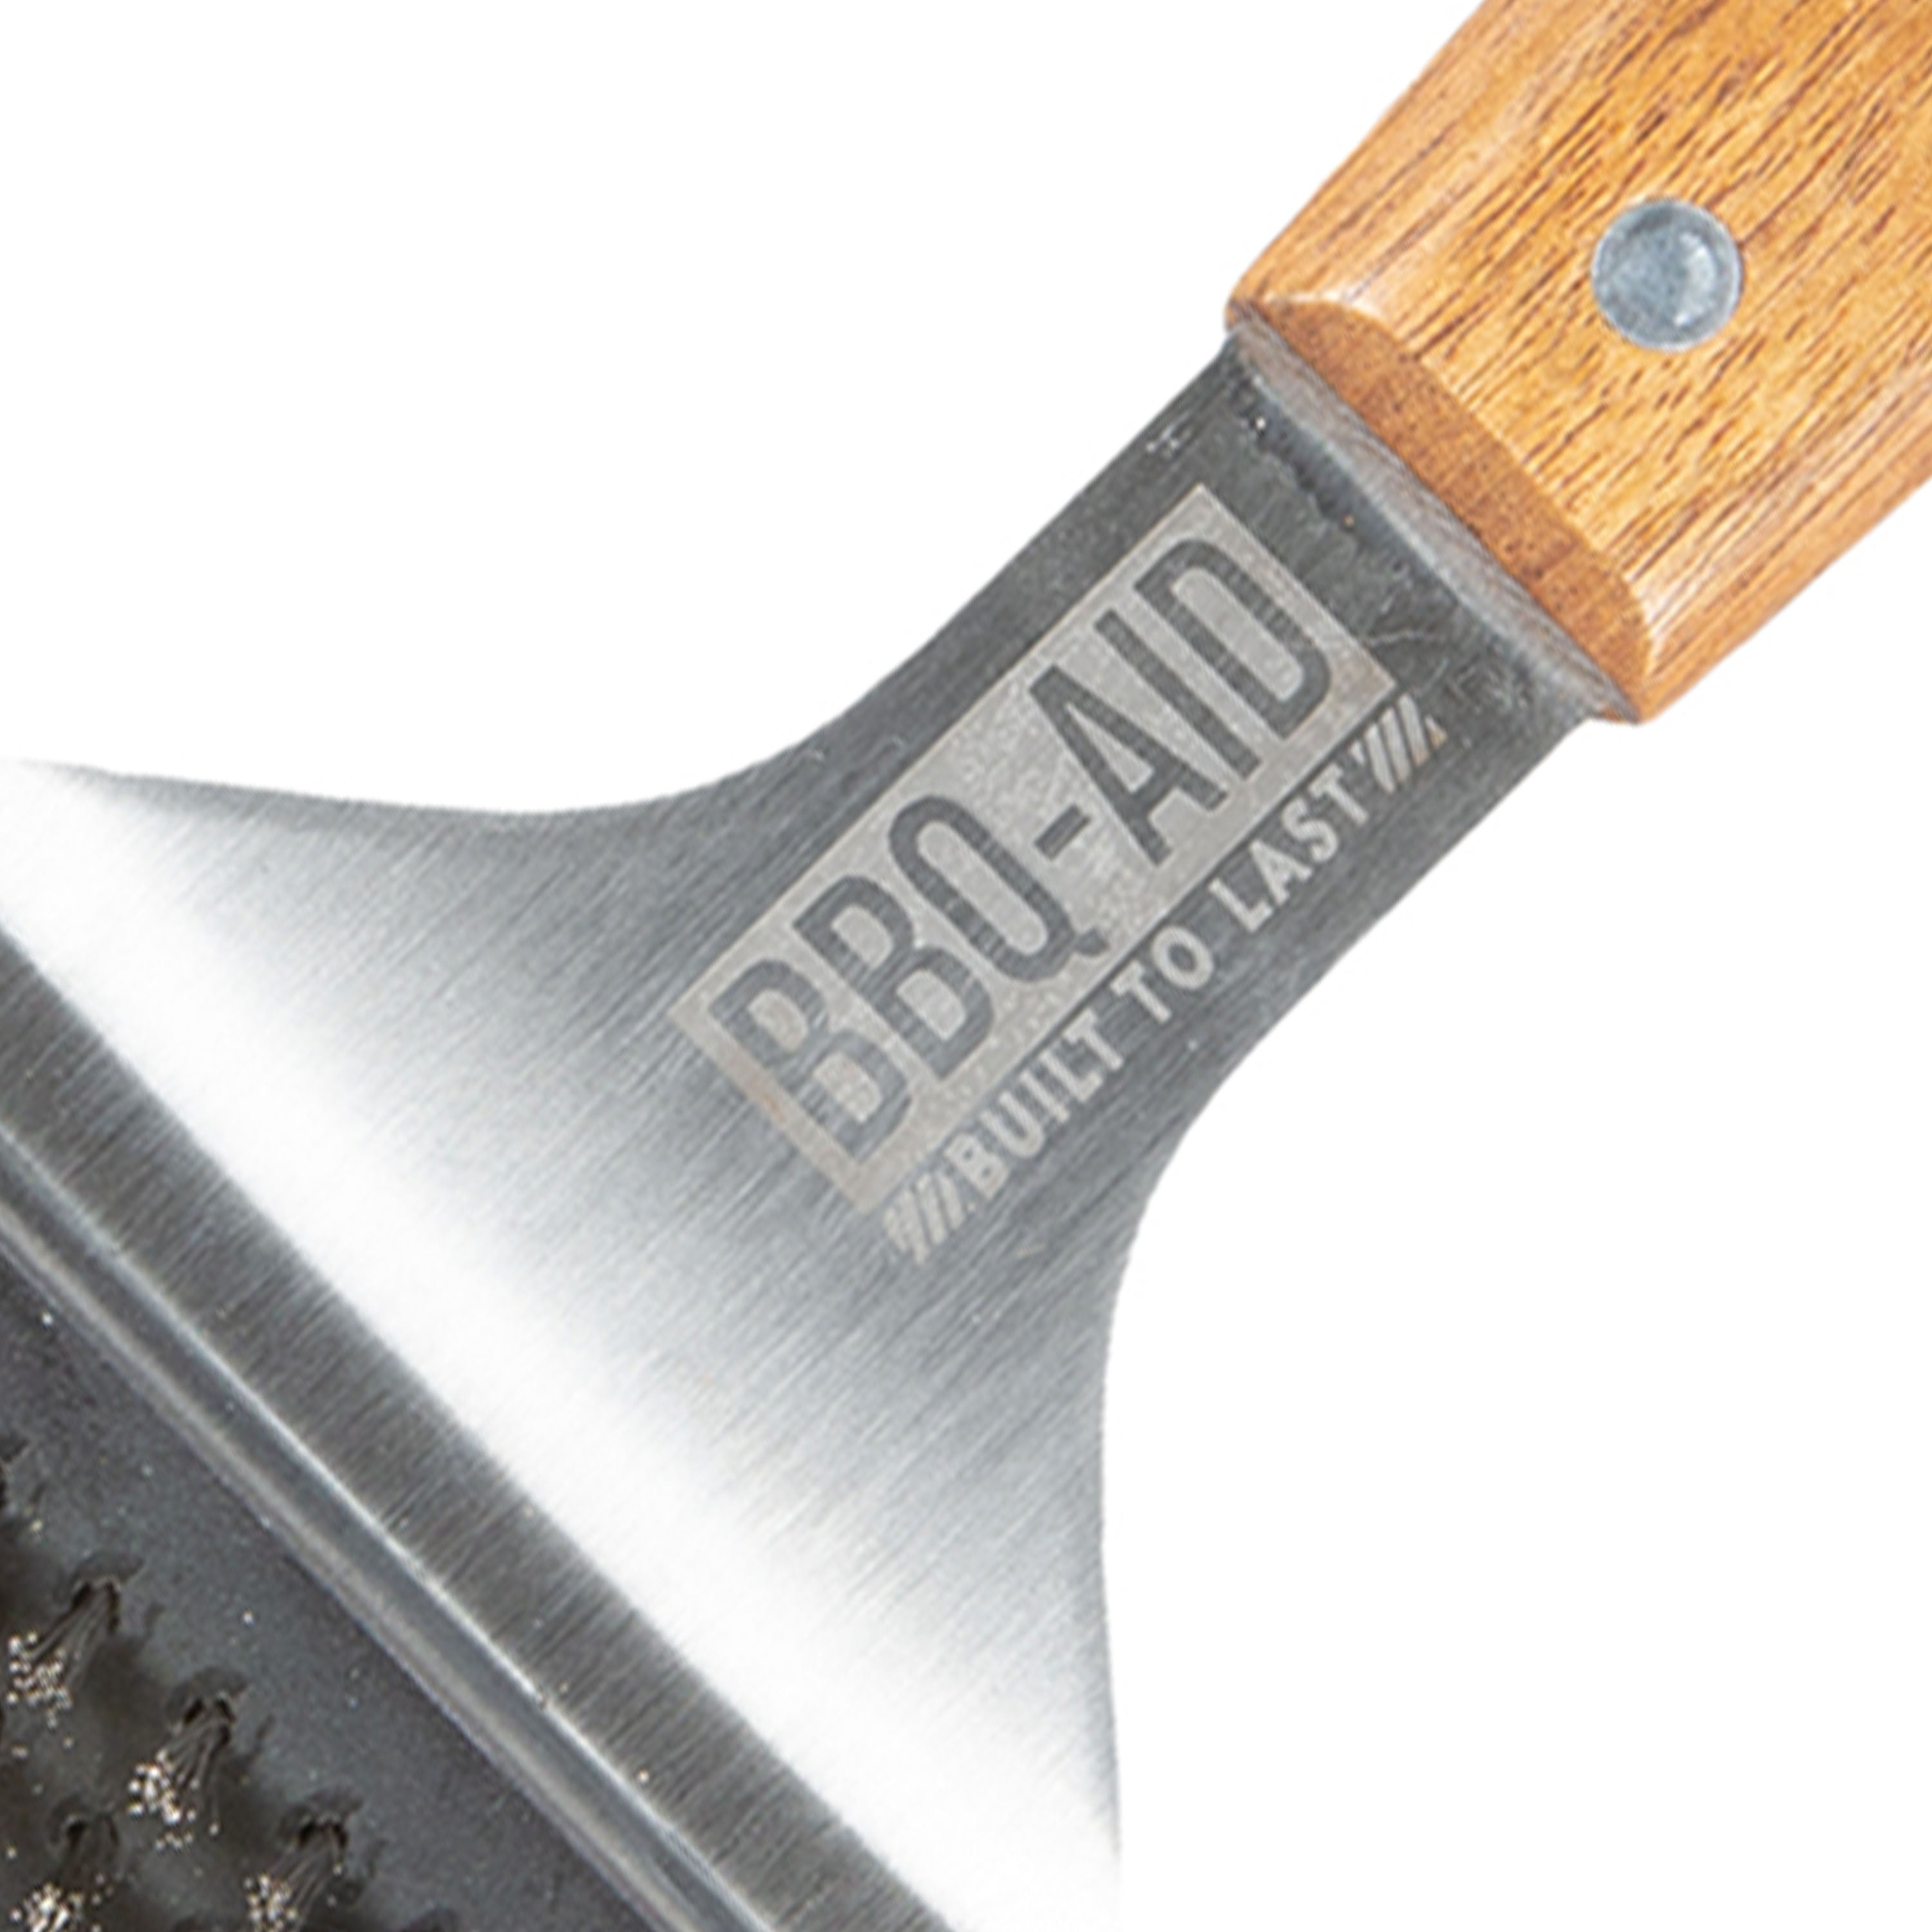 No Scratch Cleaning for Any Grill: Char Broil & Ceramic BBQ-Aid Large Wooden Handle and Stainless Steel Bristles Extended Barbecue Grill Brush Cleans All Angles 